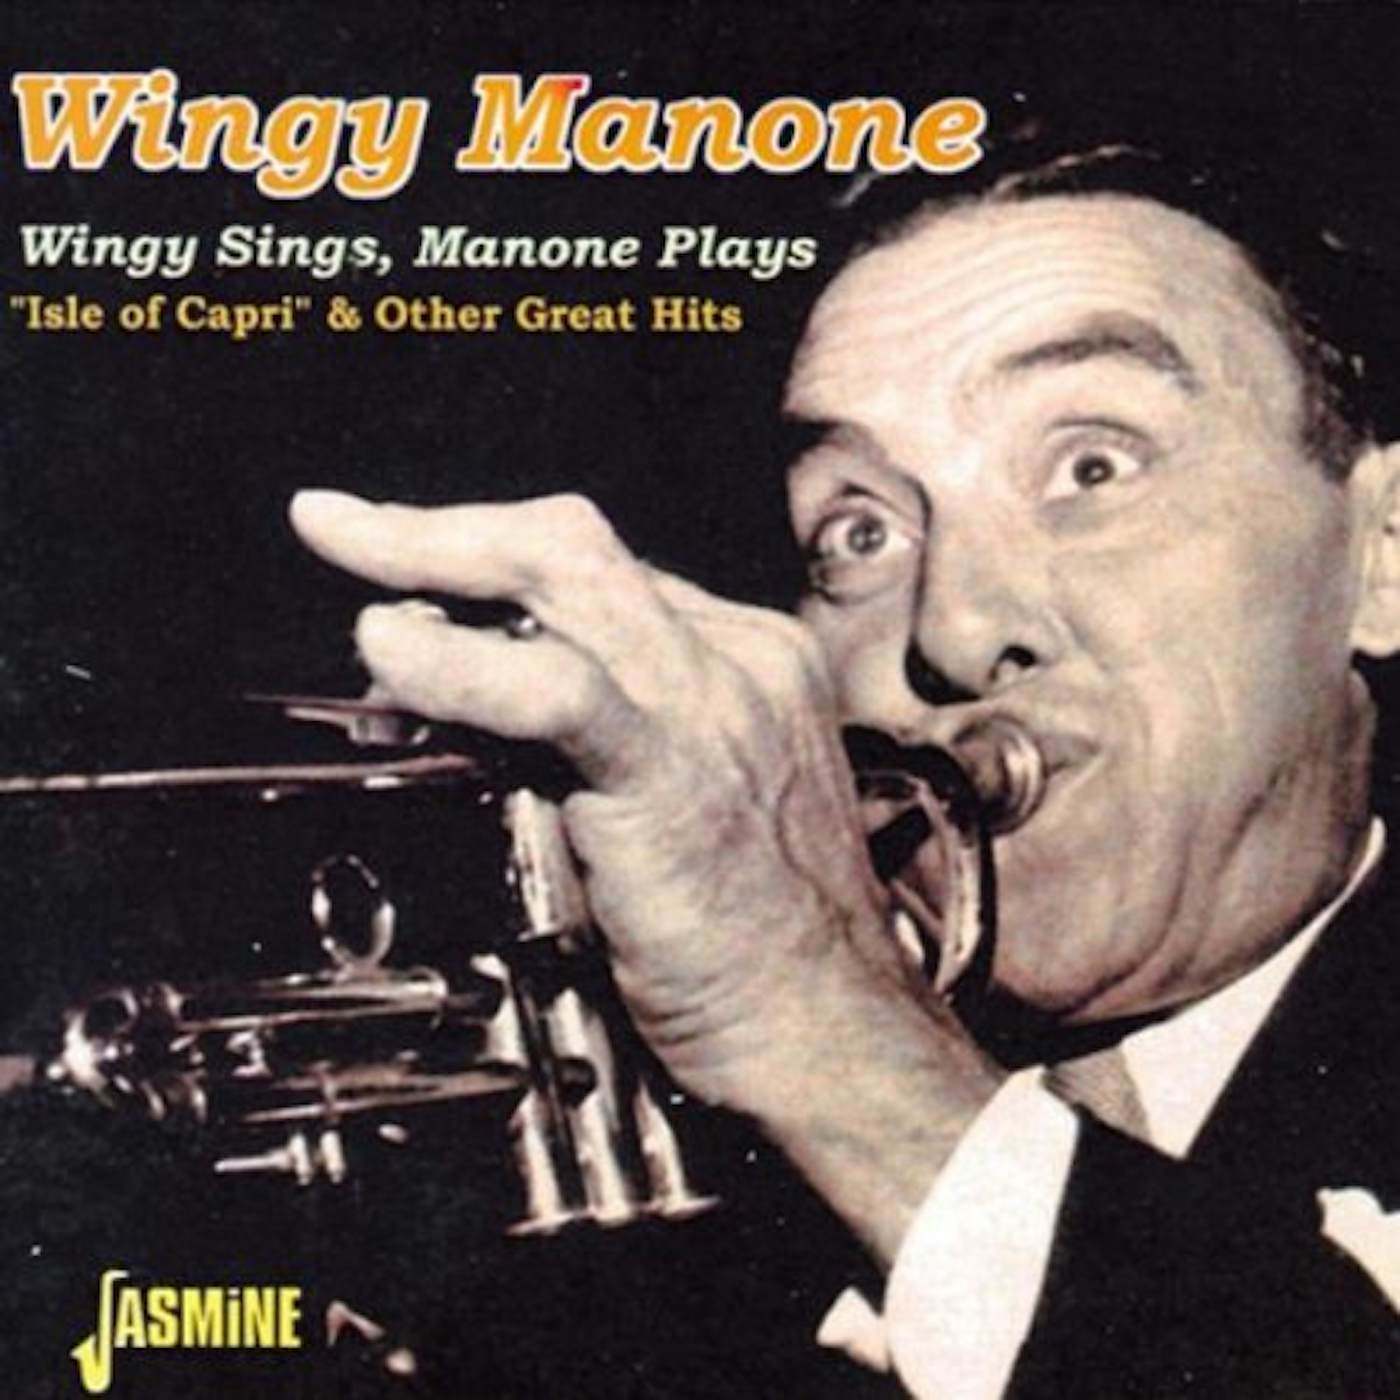 Wingy Manone WINGY SINGS MANONE PLAYS ISLE OF CAPRI & OTHER G.H CD